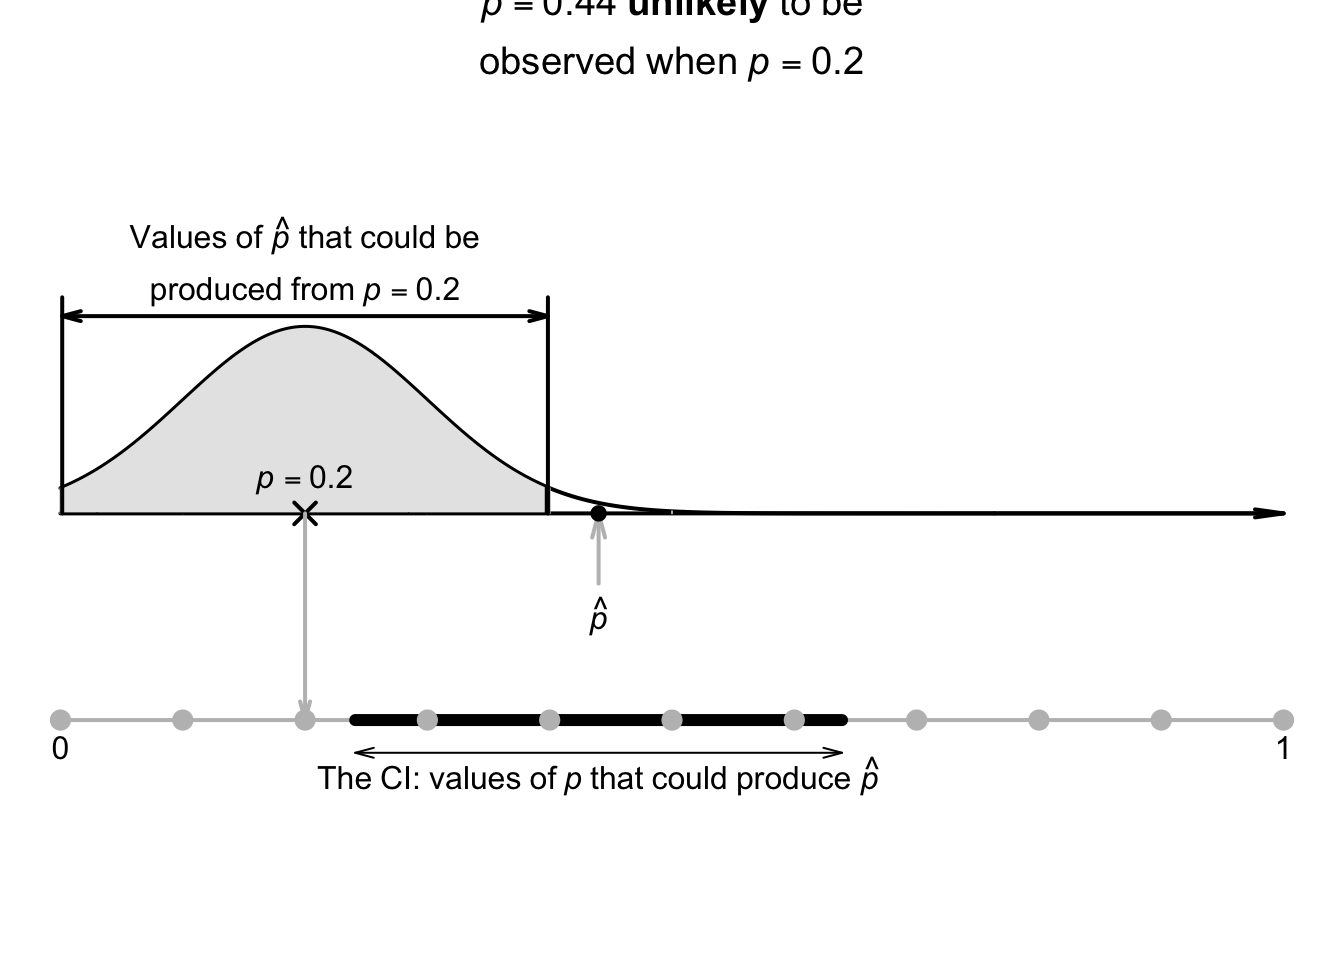 The CI gives an interval containing values of $p$ that may have produced the observed value of $\hat{p}$. Here, the CI is $0.241$ to $0.639$.